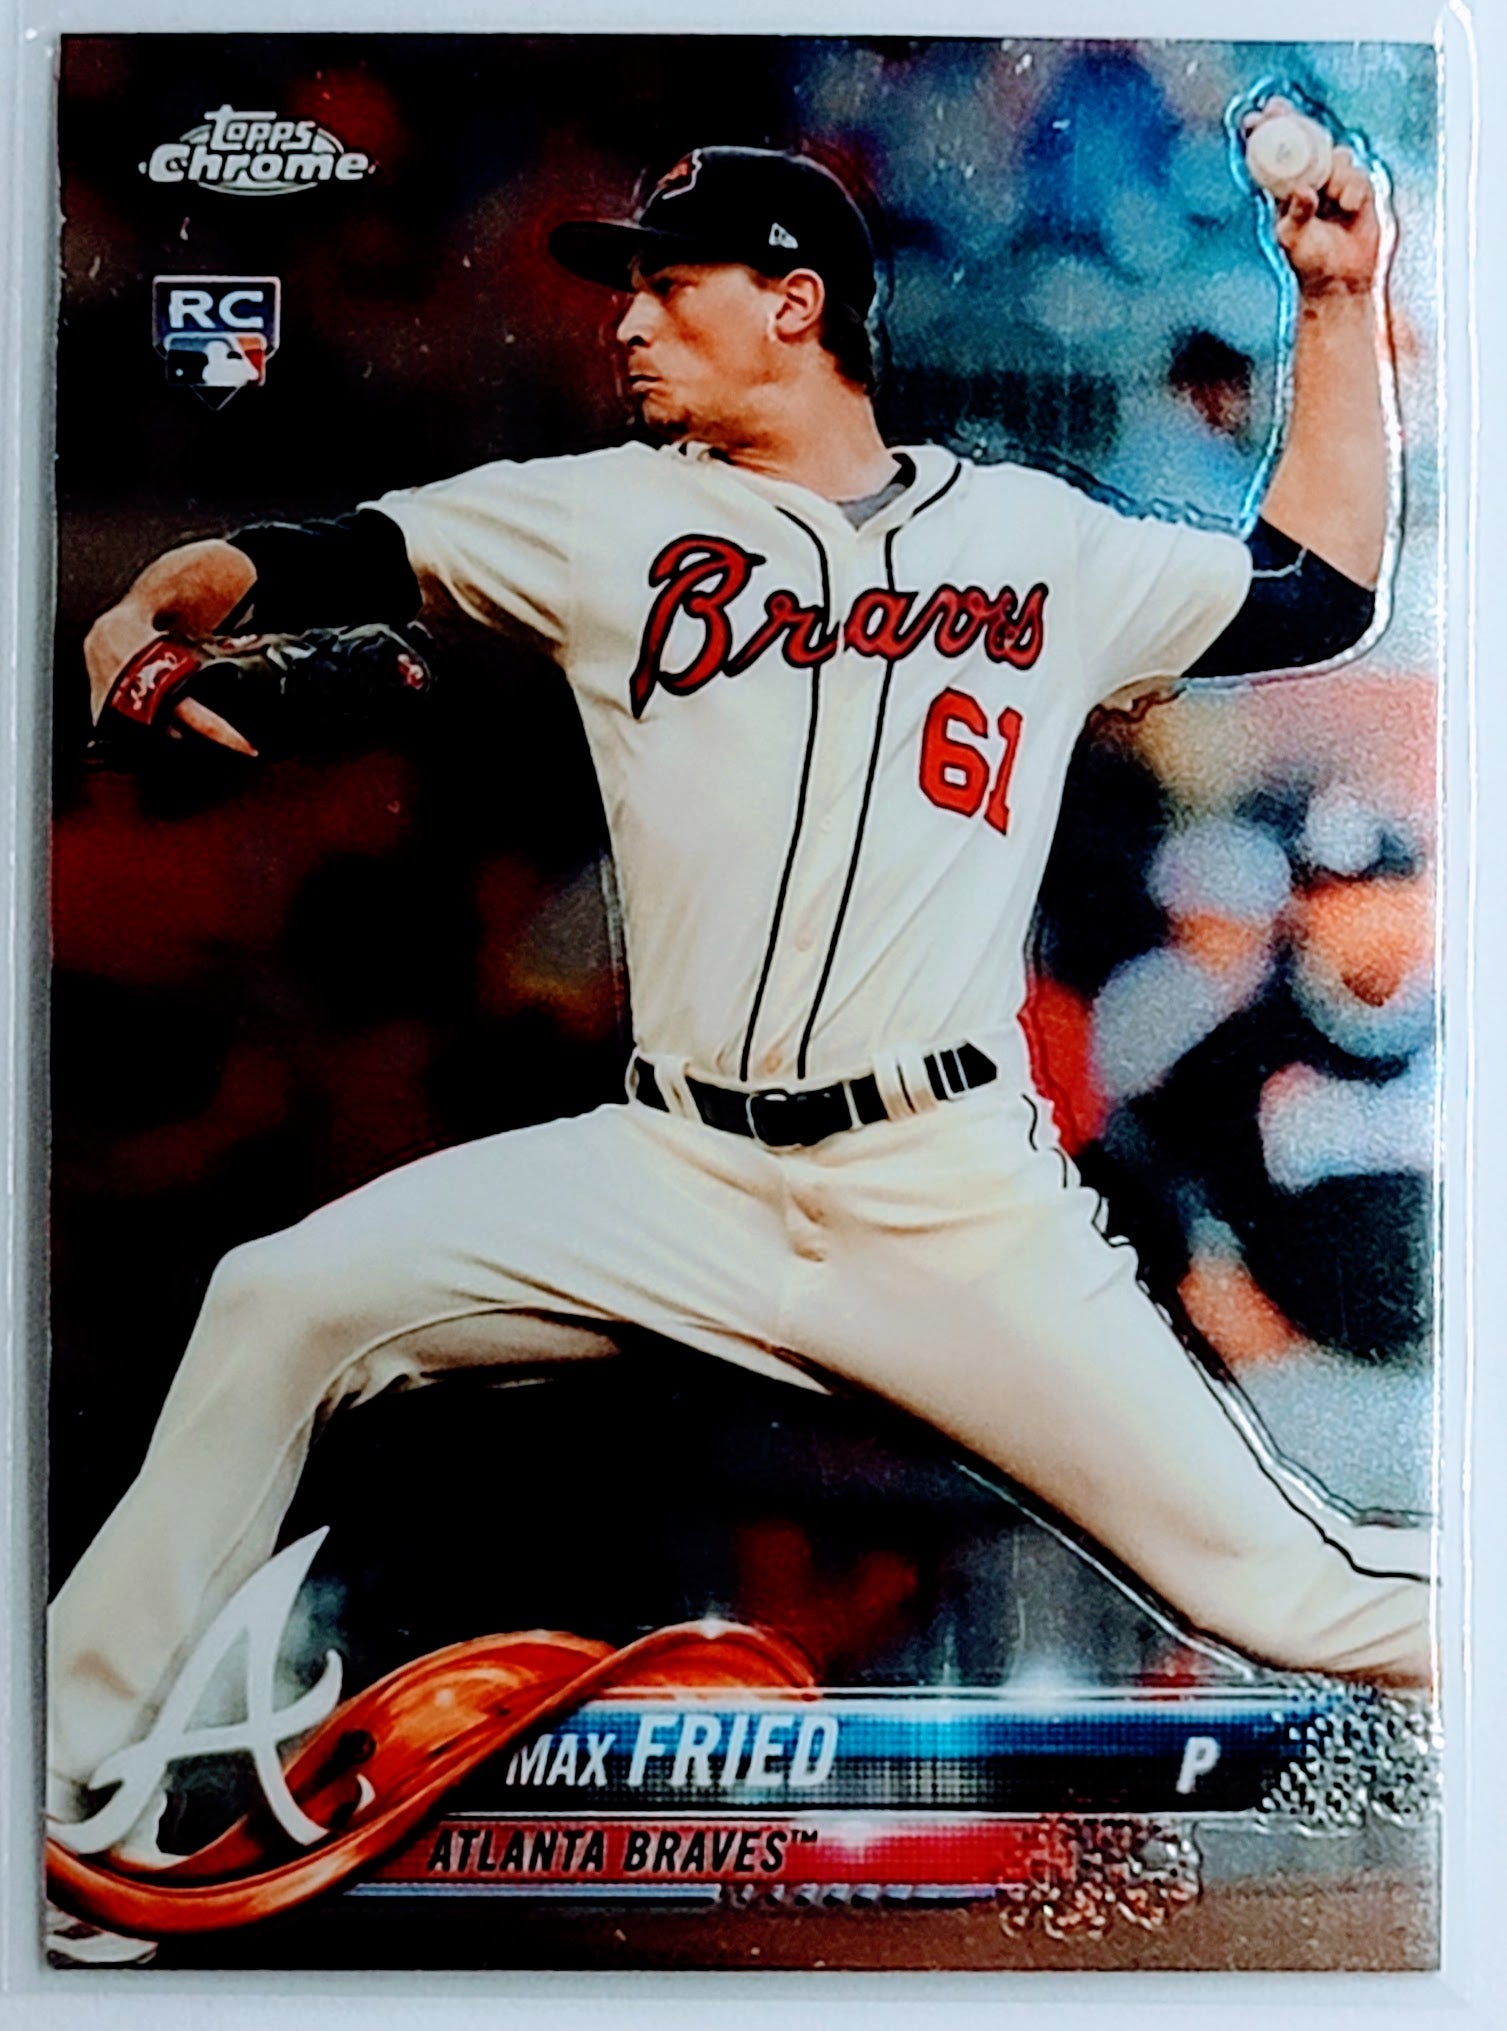 2018 Topps Chrome Max
  Fried   RC Atlanta Braves Baseball Card
  TH1C4 simple Xclusive Collectibles   